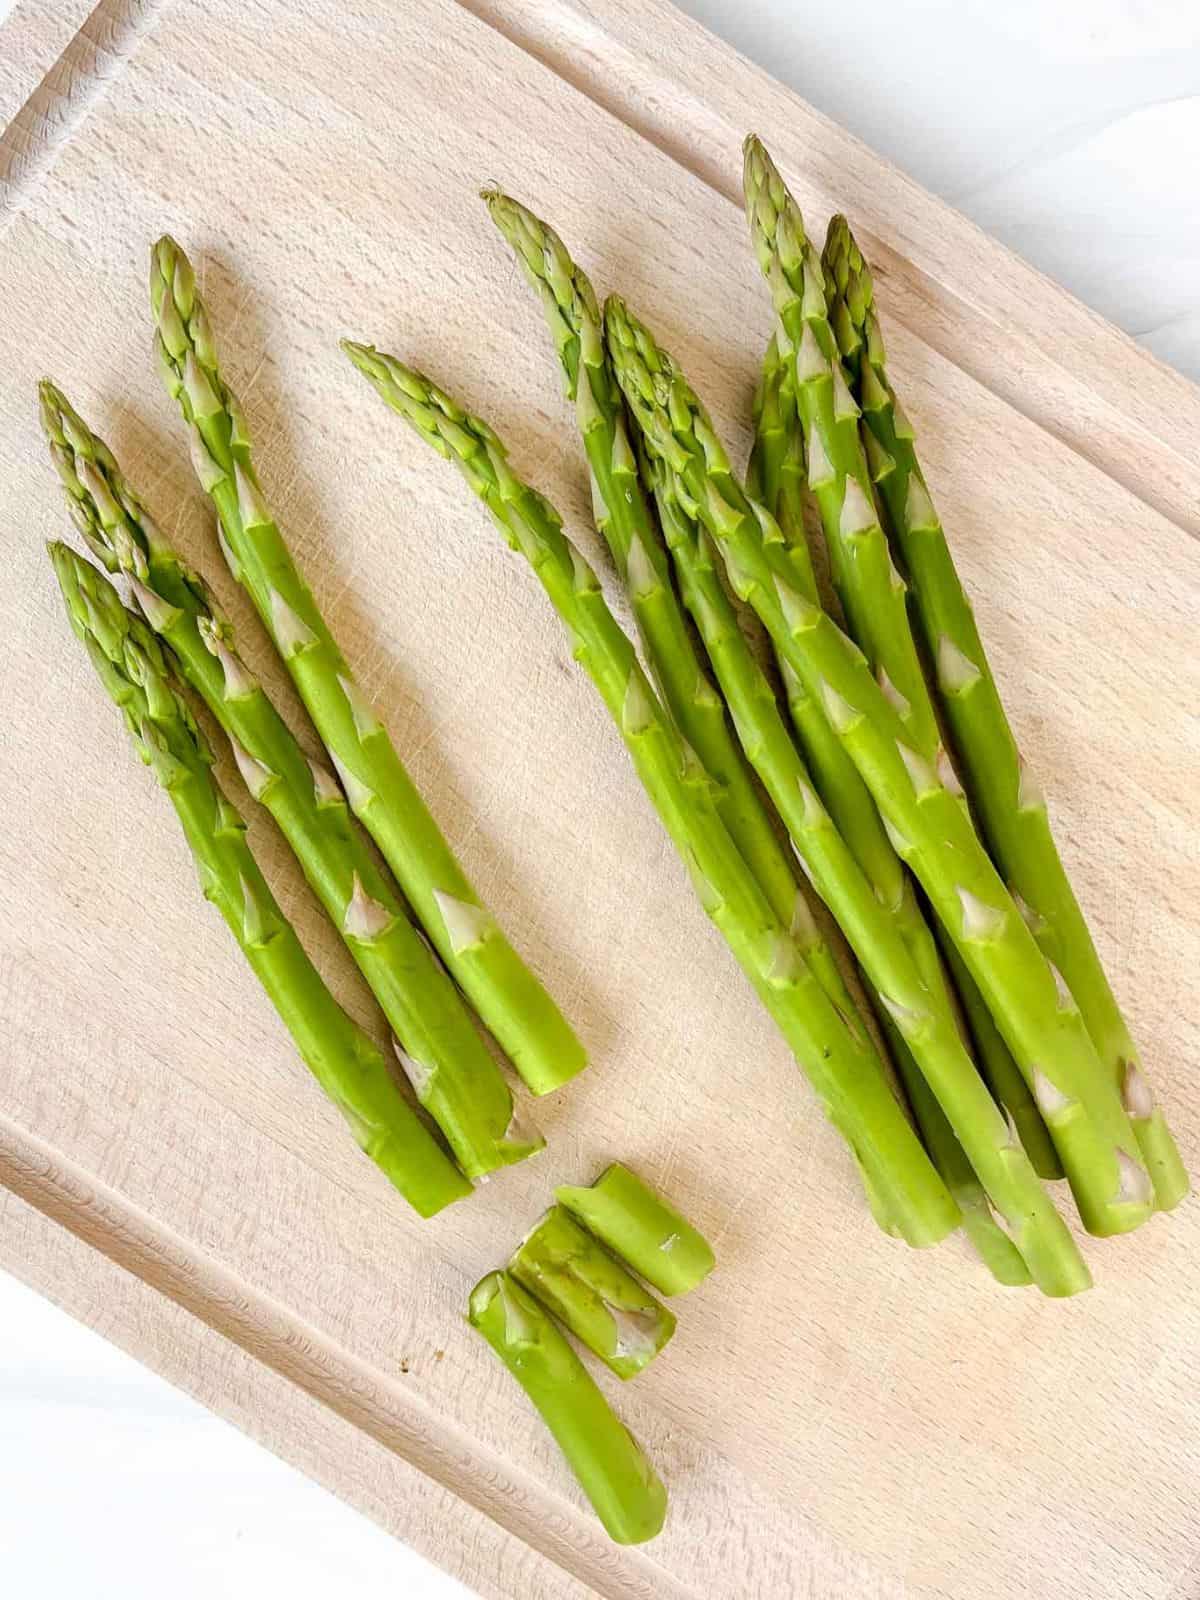 asparagus spears on a wooden board, with half full spears and half snapped spears.